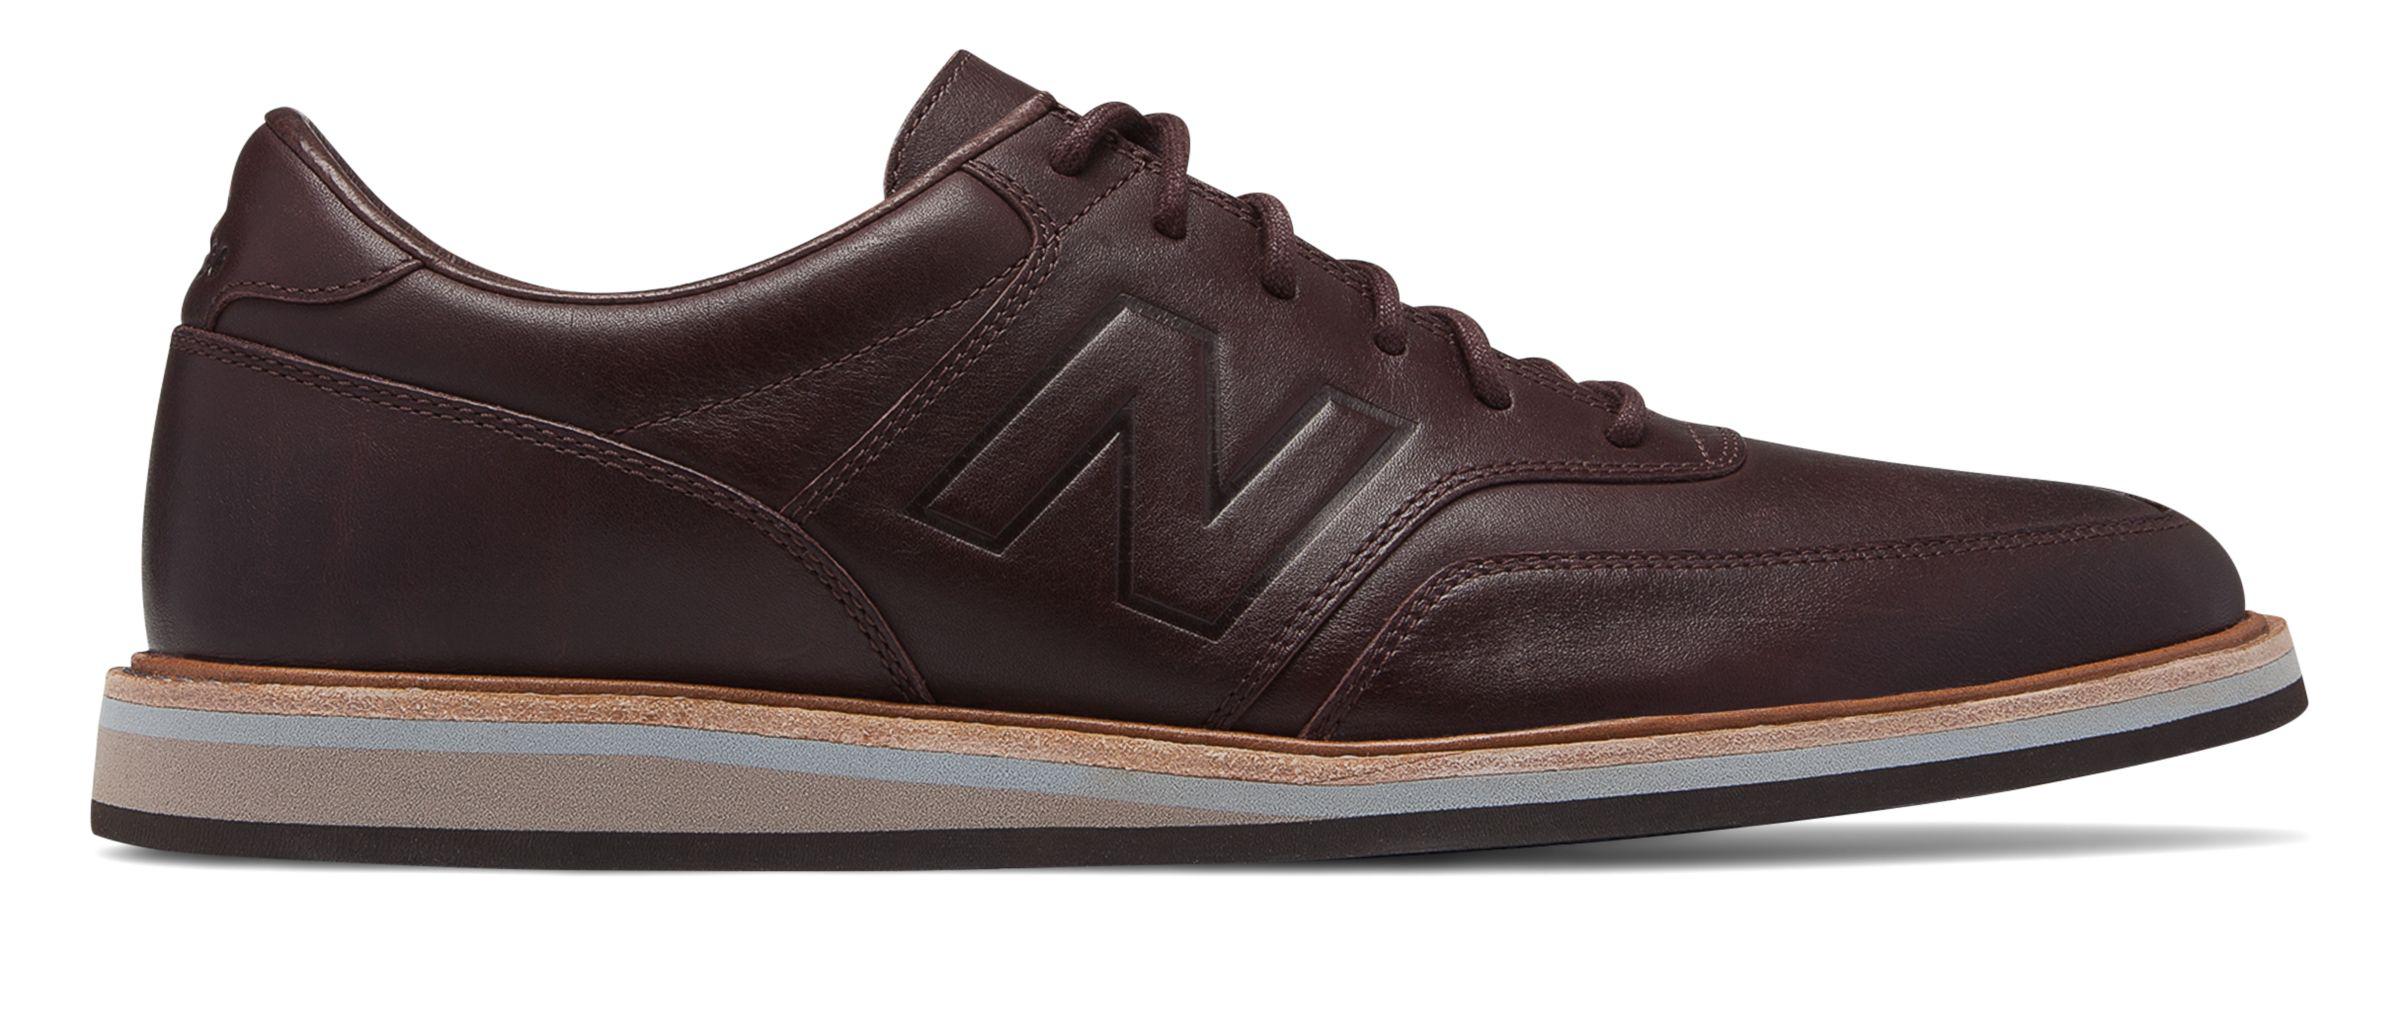 Leather 1100 in Brown for Men - Lyst